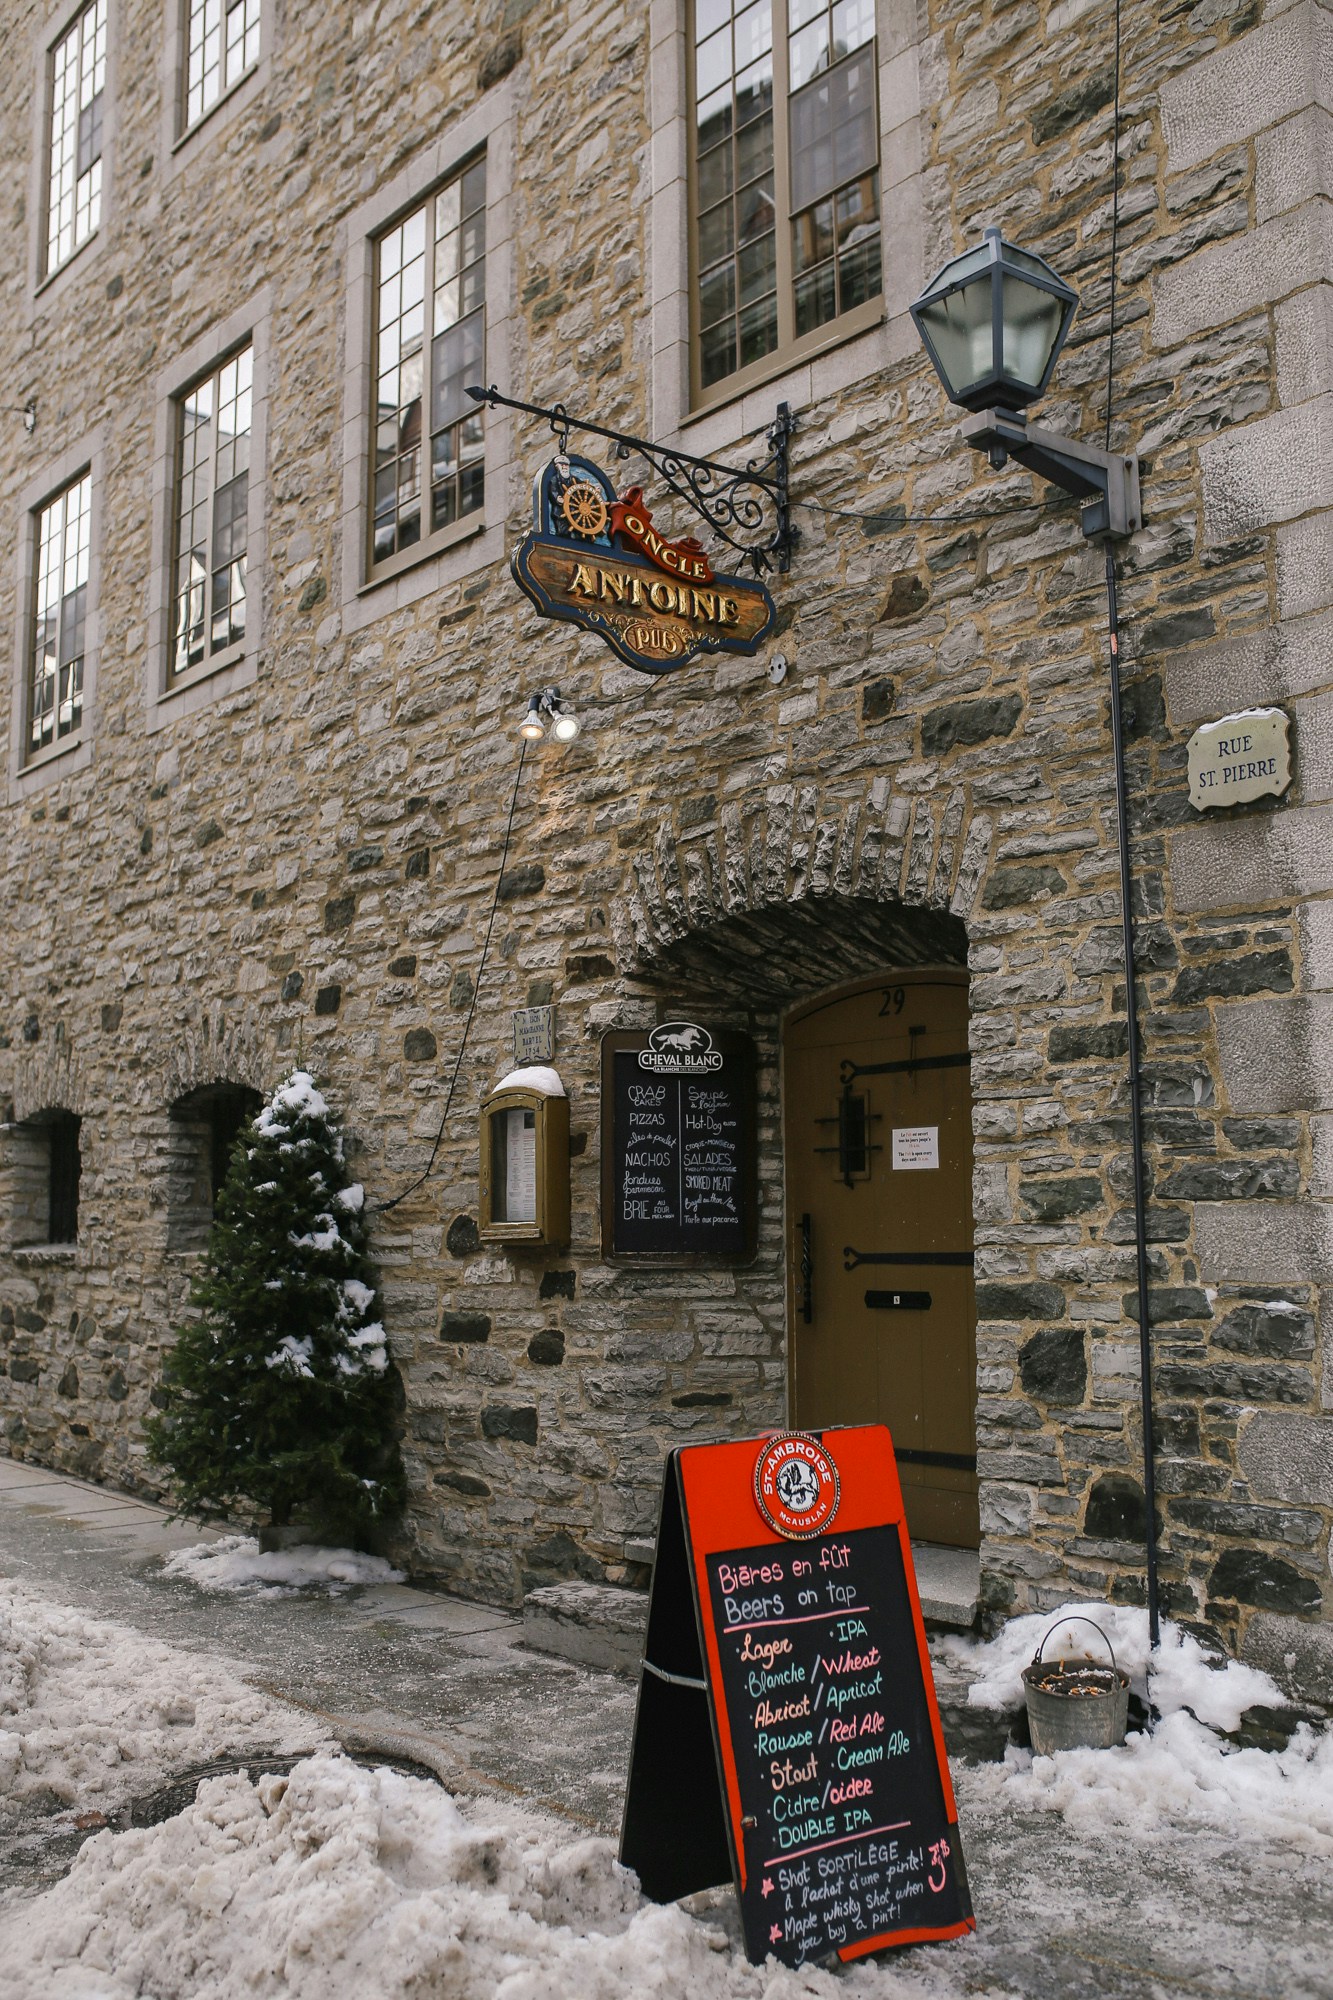 Top 10 Things to do in Quebec City in a weekend in winter: have a couple pints at l'Oncle Antoine, one of Canada's oldest bars dating back to 1754!